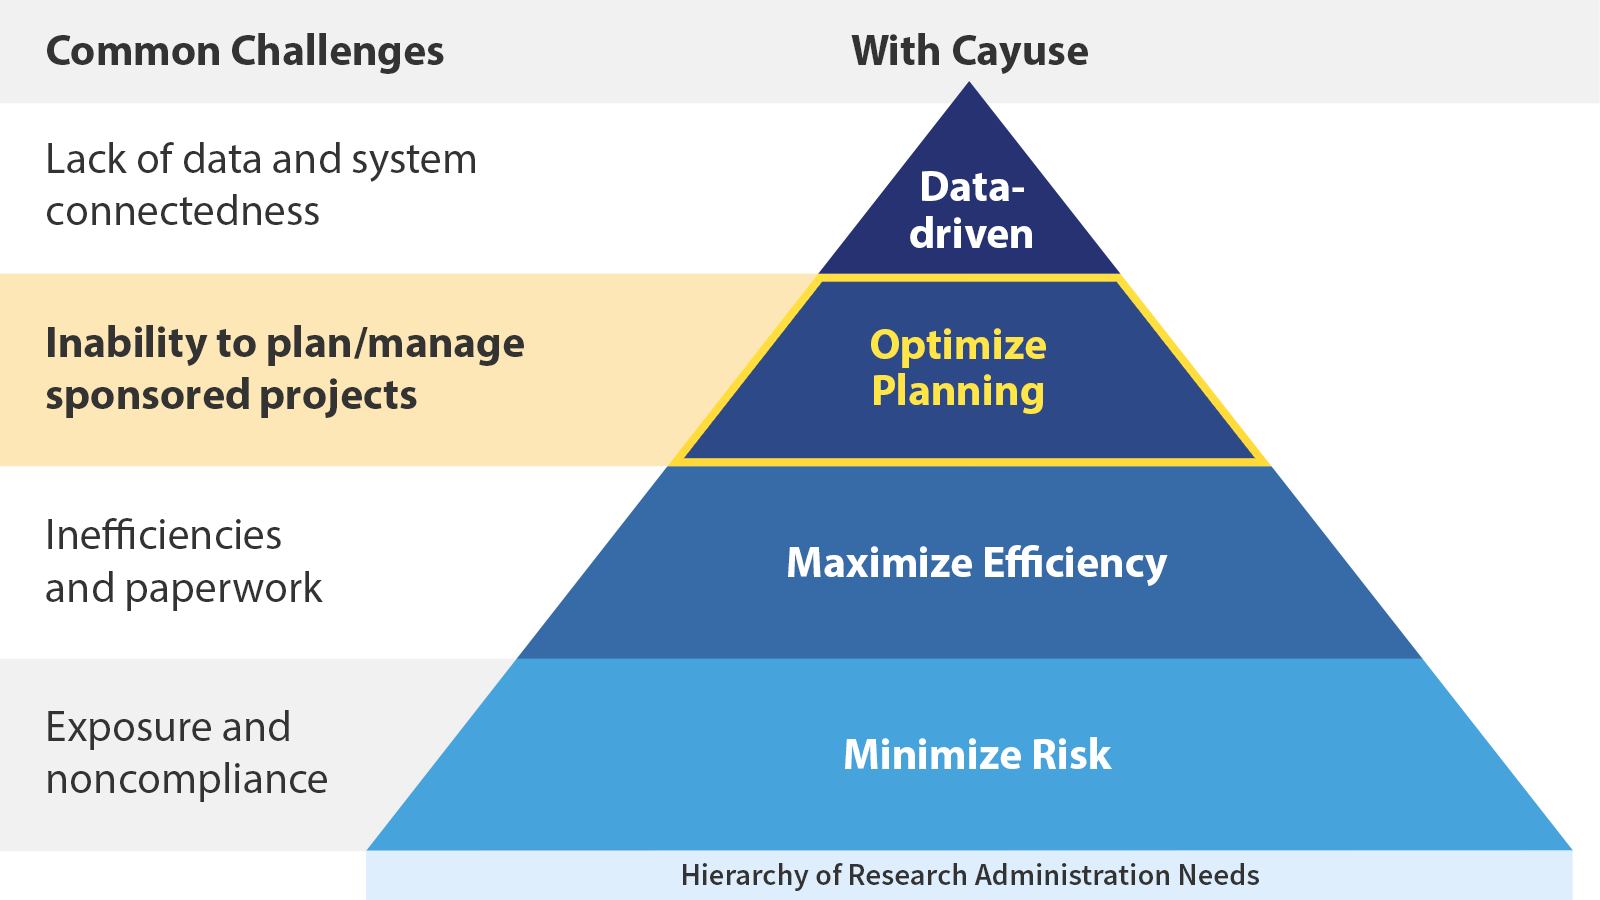 Hierarchy of Research Administration Needs: Optimize Planning